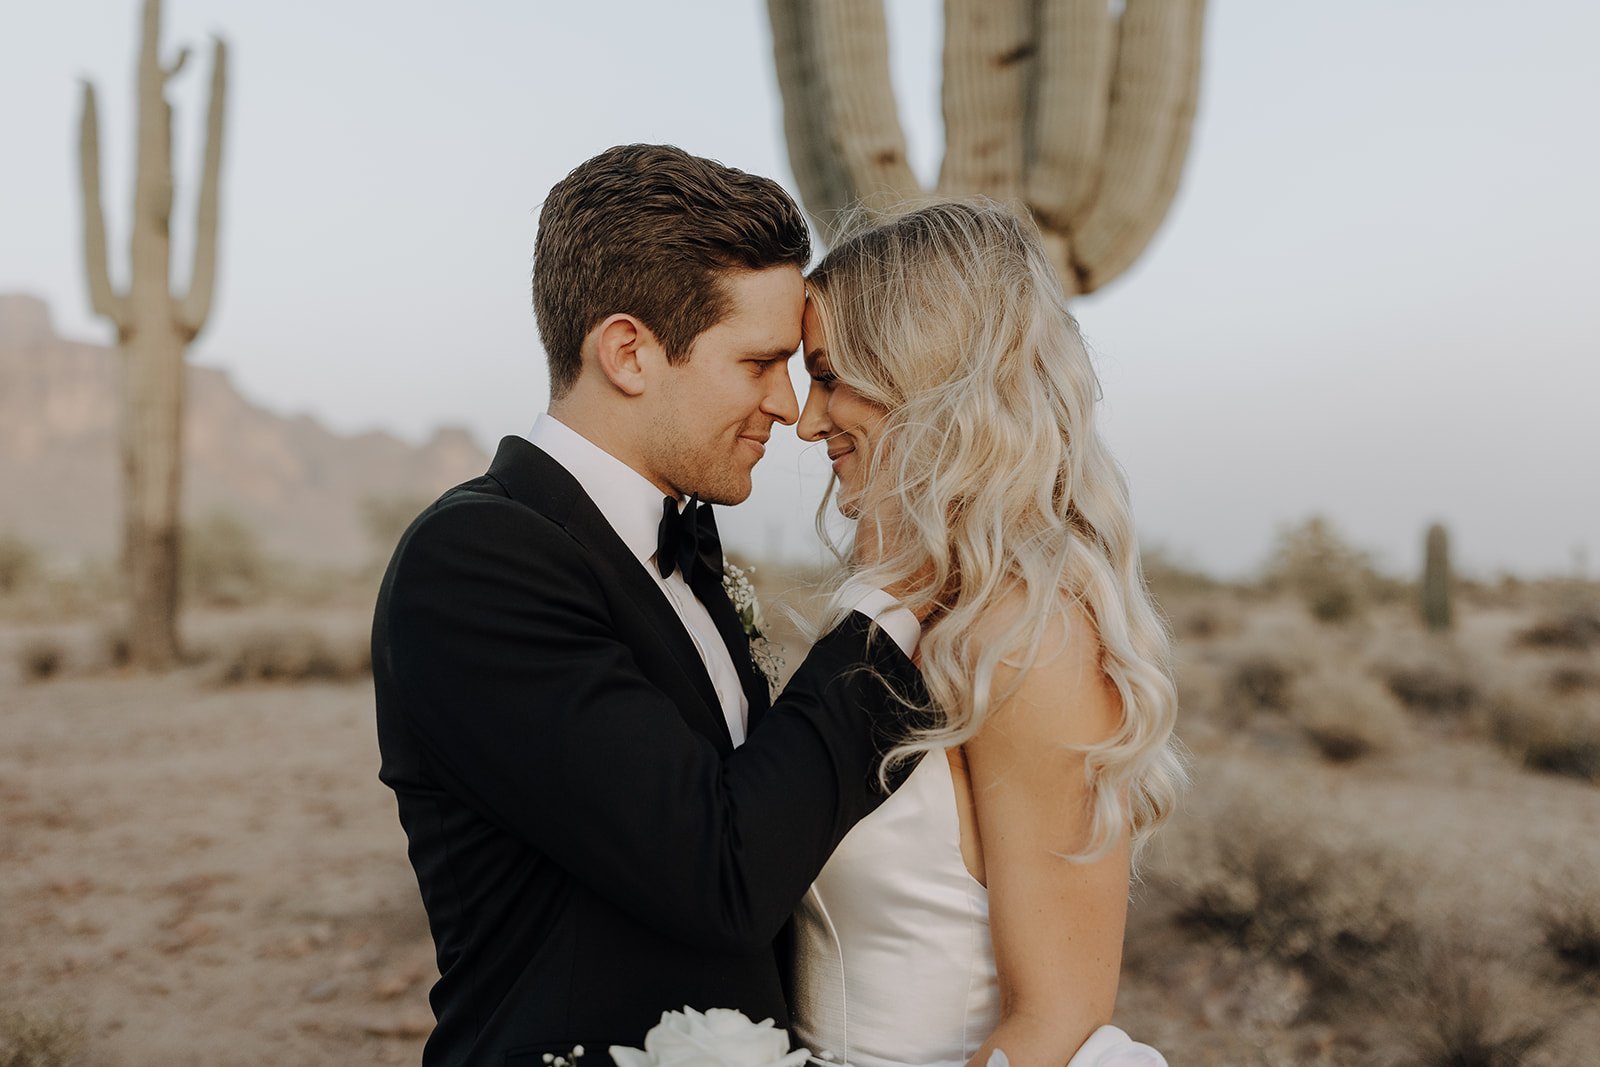 Bride and groom touching foreheads during couple photos in the Arizona desert